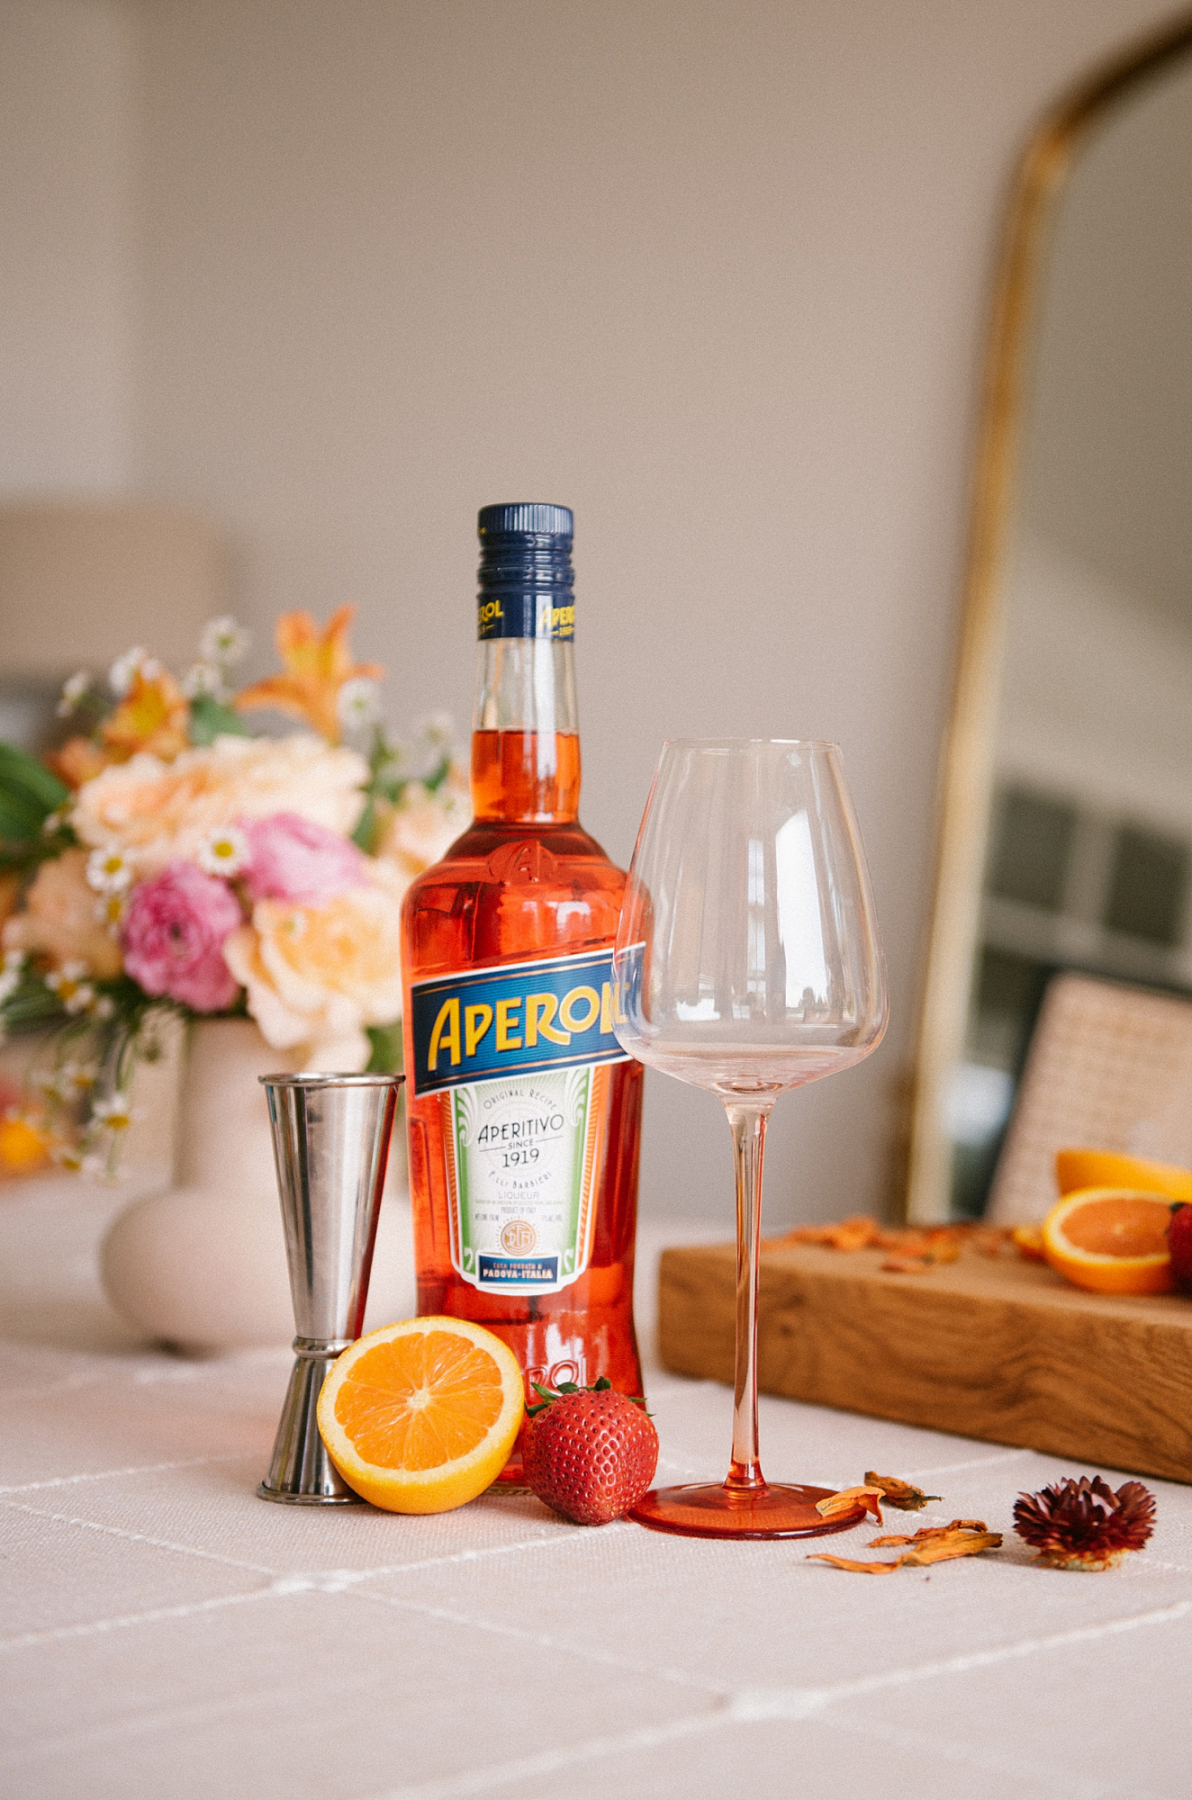 How to Make Aperol Spritz at Home